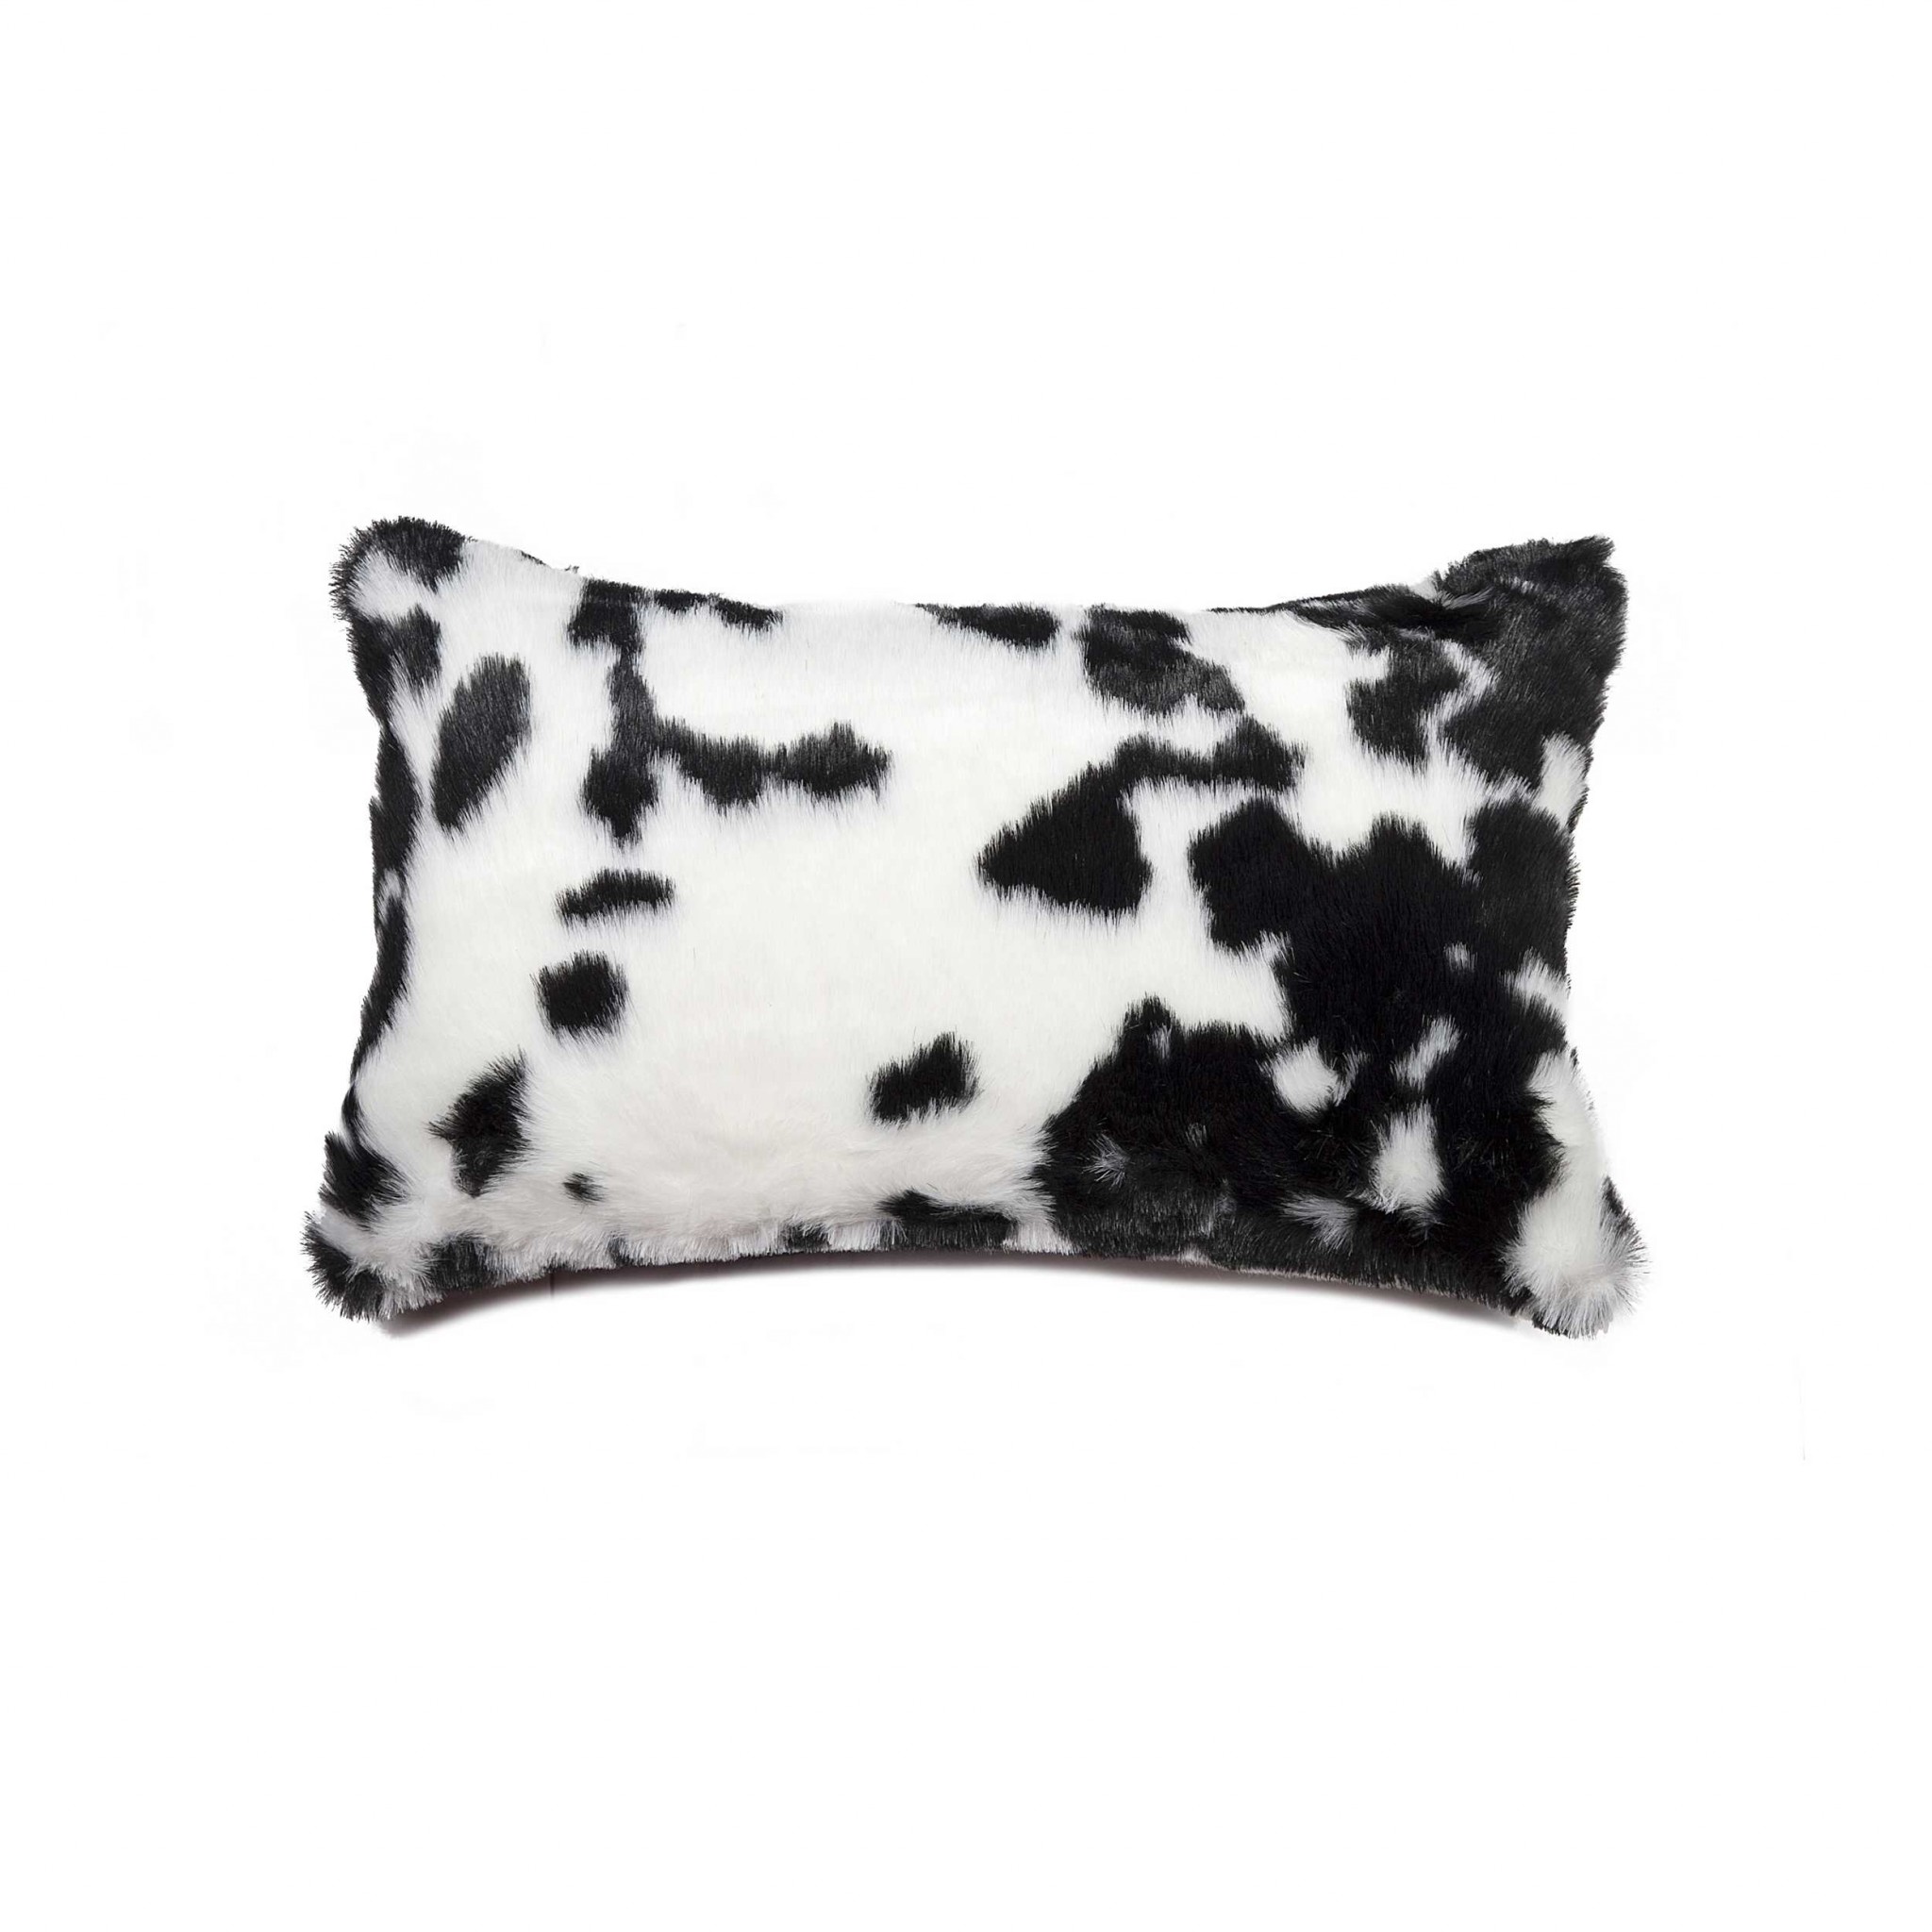 20" X 12" X 1" Sugarland Black And White Faux Fur - Pillow - Pack of 2